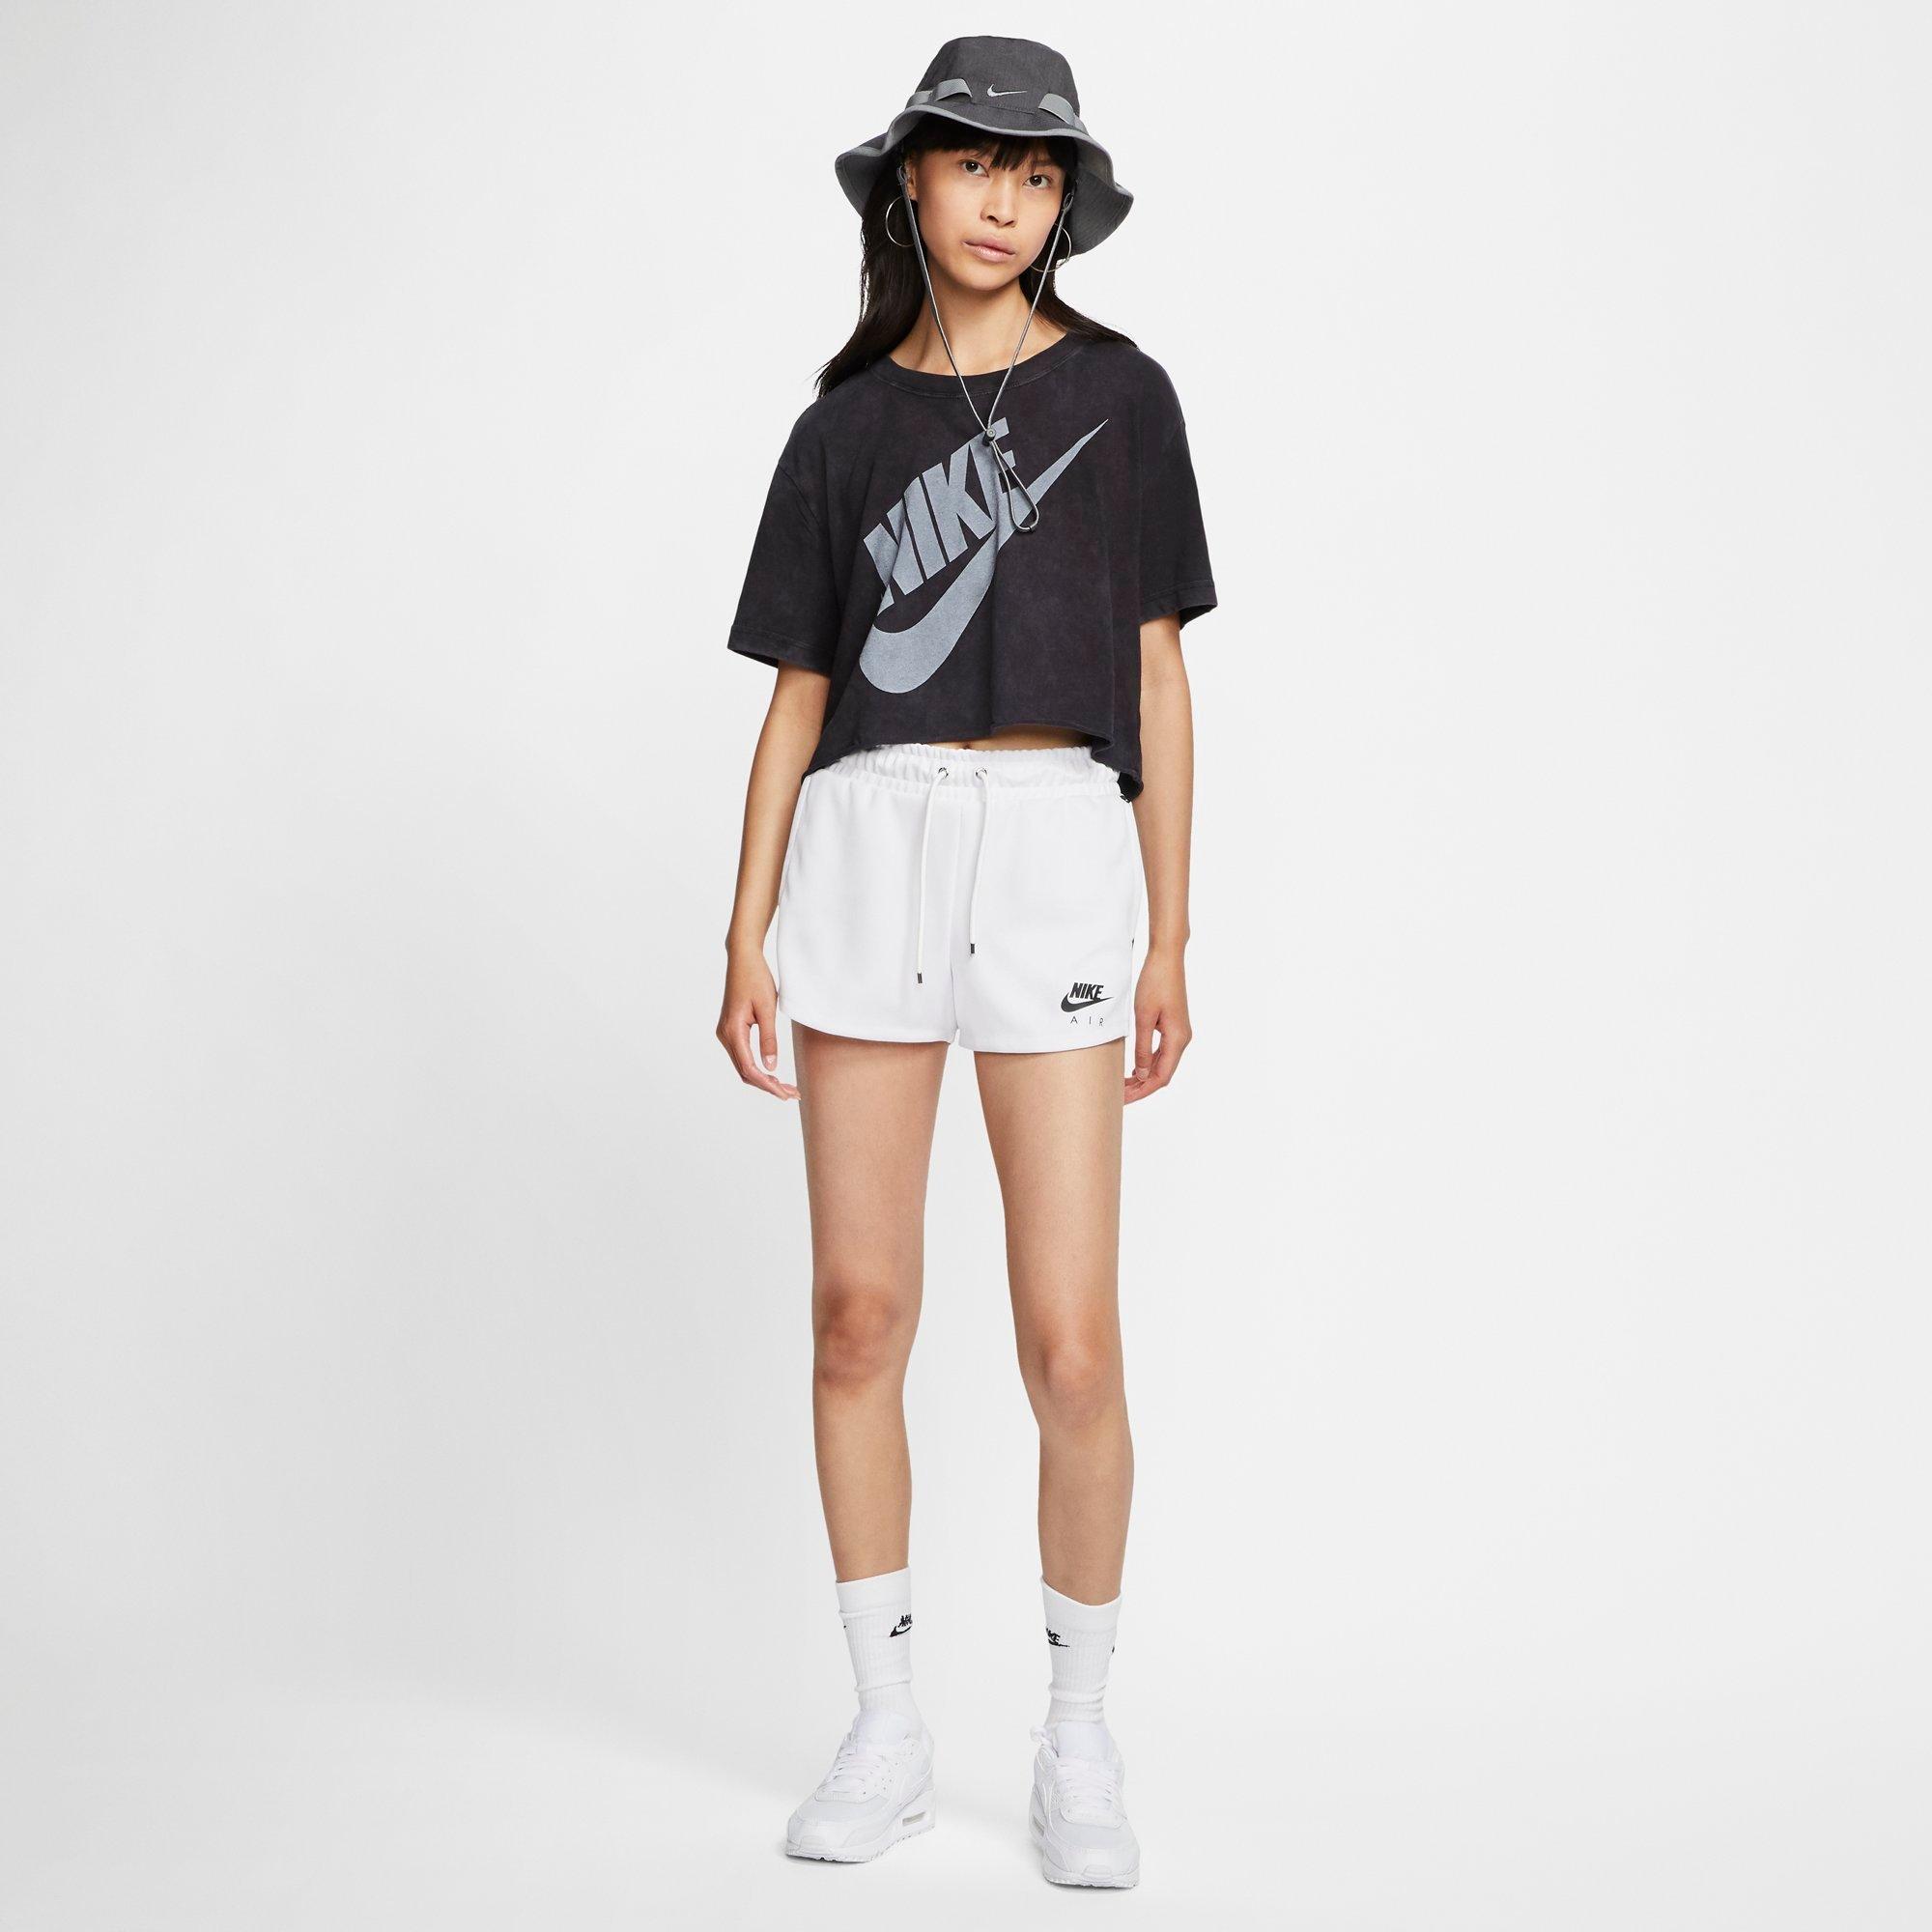 white nike shorts outfit